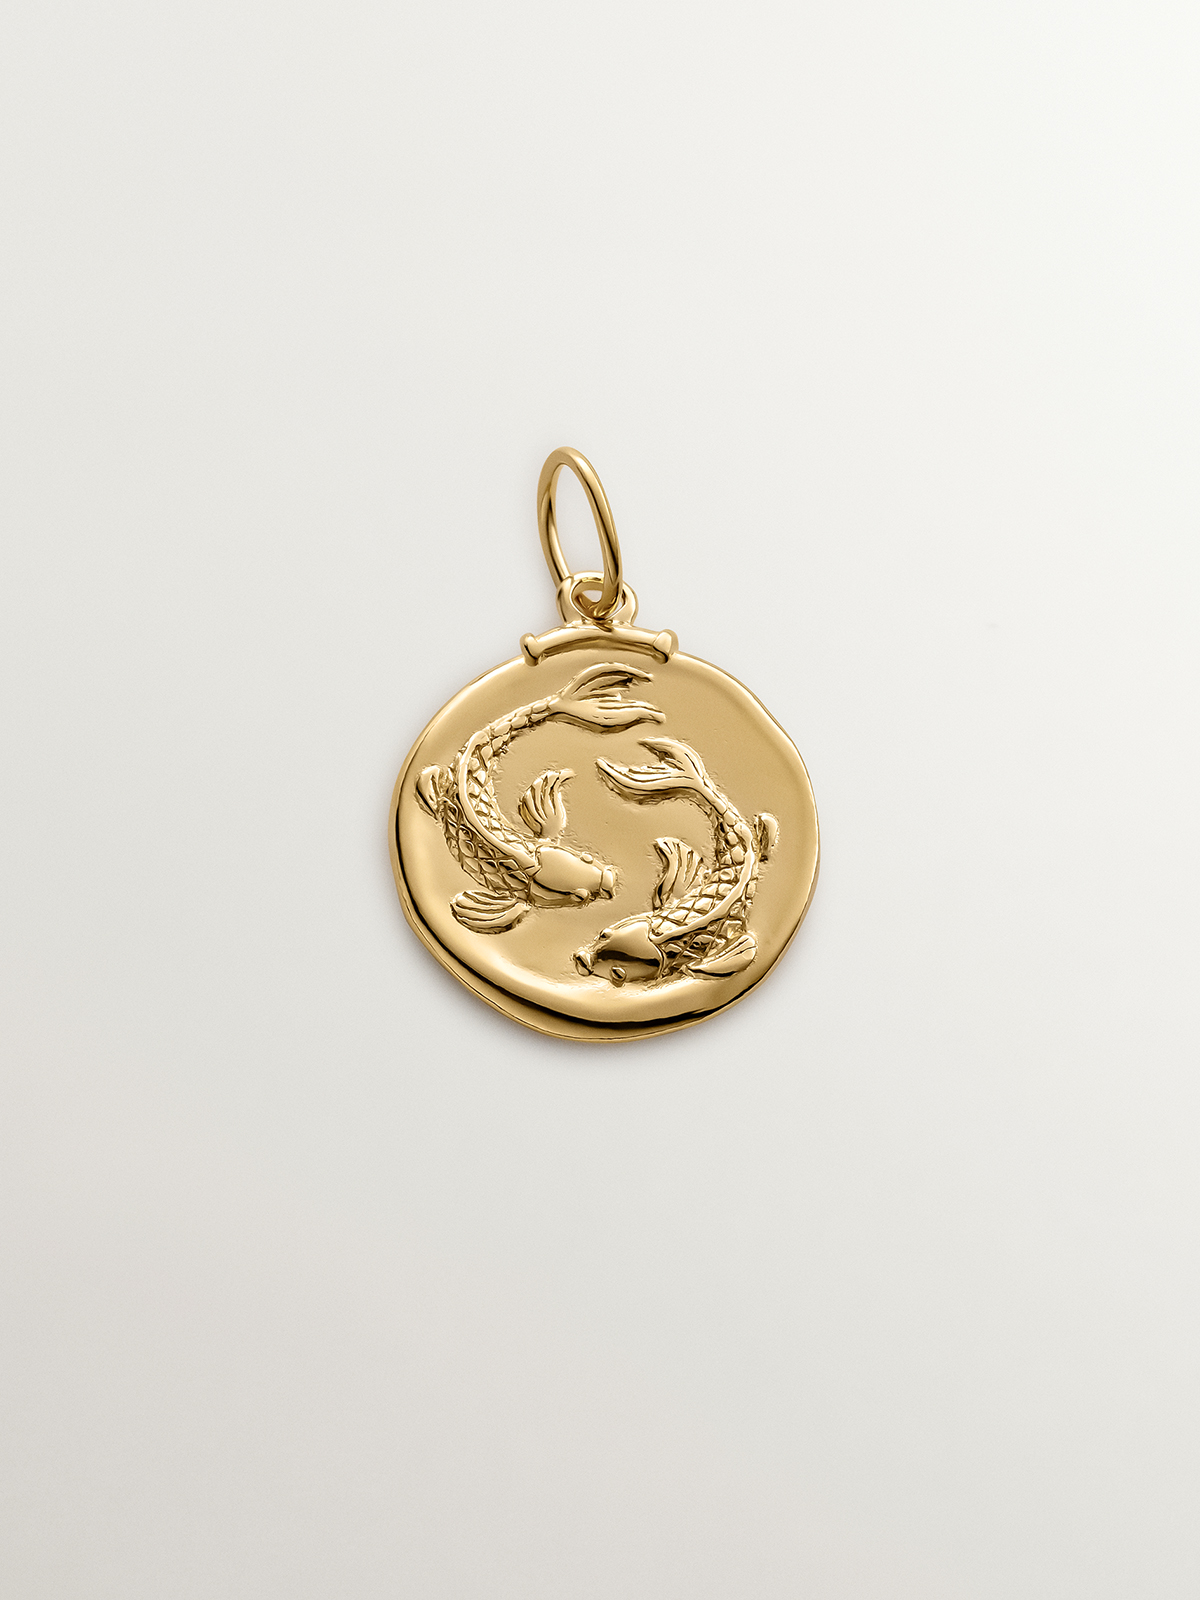 Pisces Charm made from 925 silver bathed in 18K yellow gold.